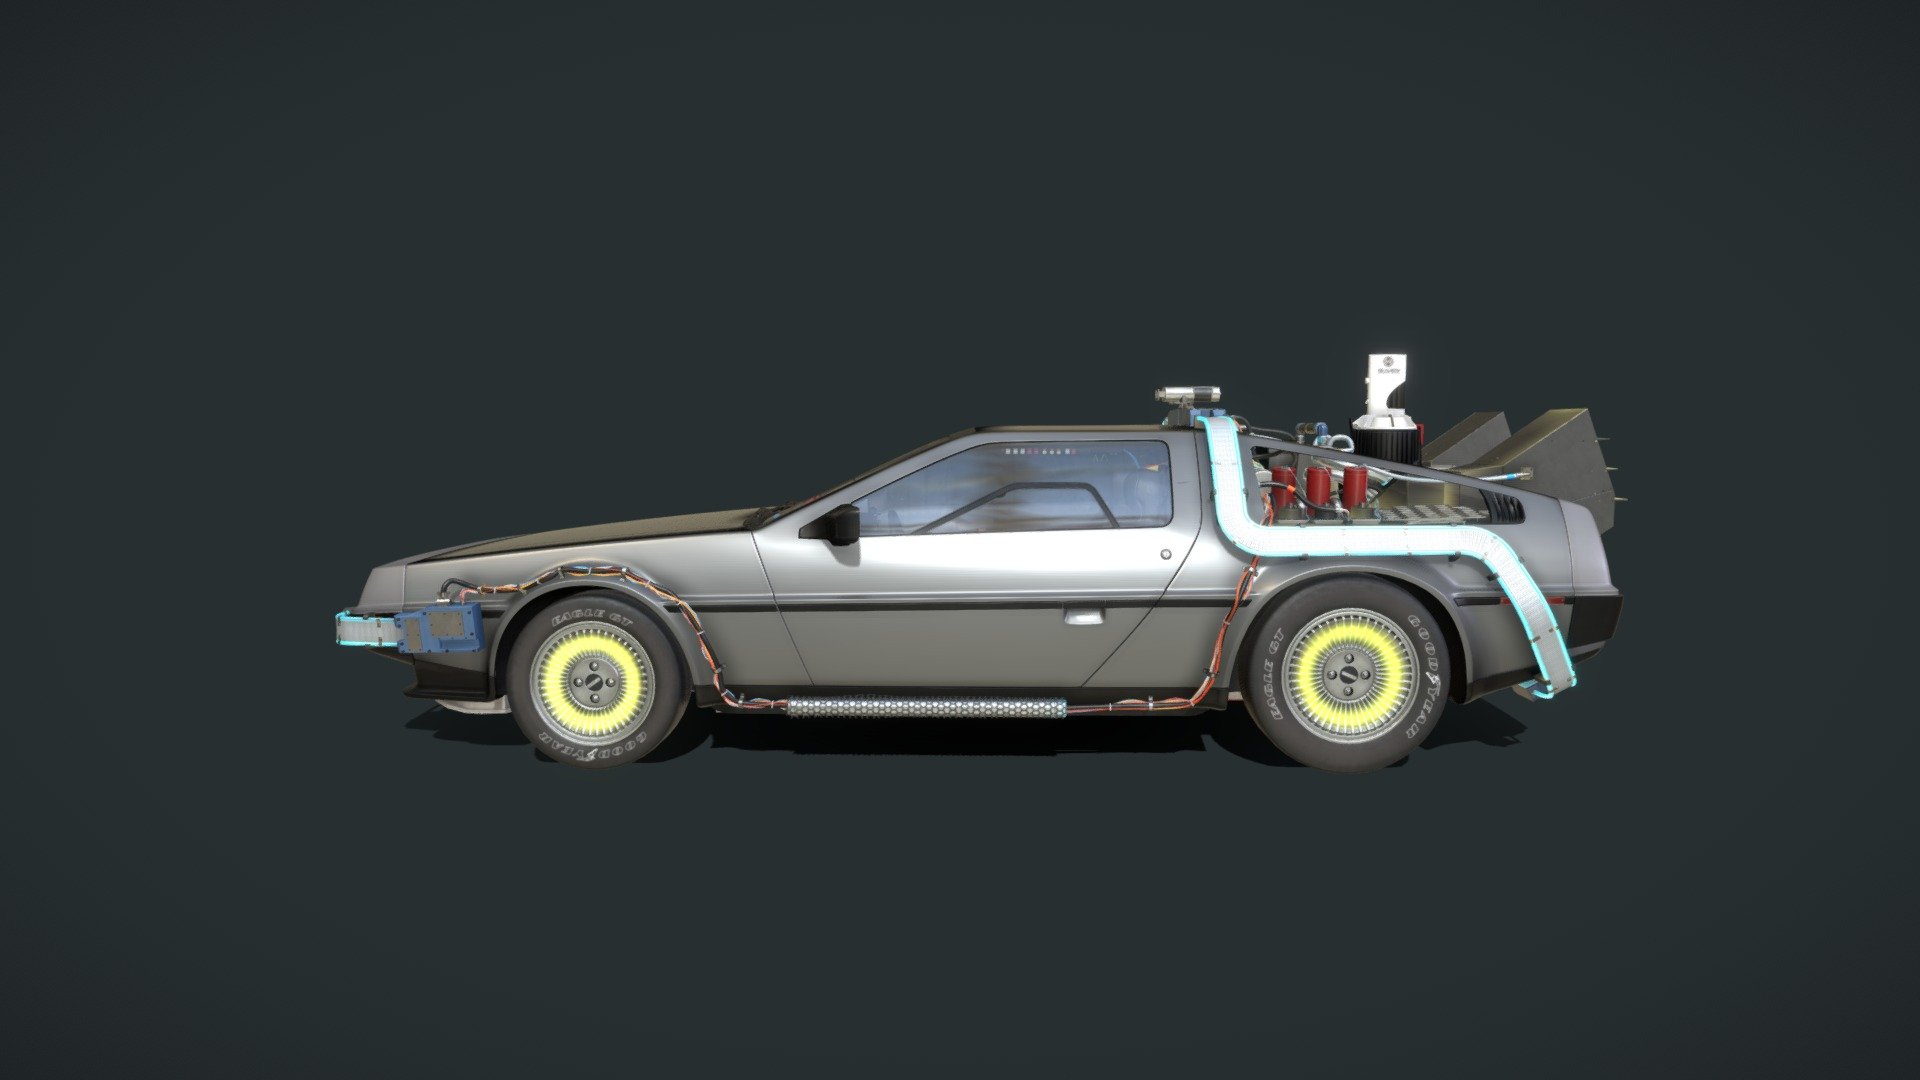 DELOREAN DMC-12 Time Machine 2015 From Part II - 3D model by Peter_D  (@better_peter) [c6ce065]